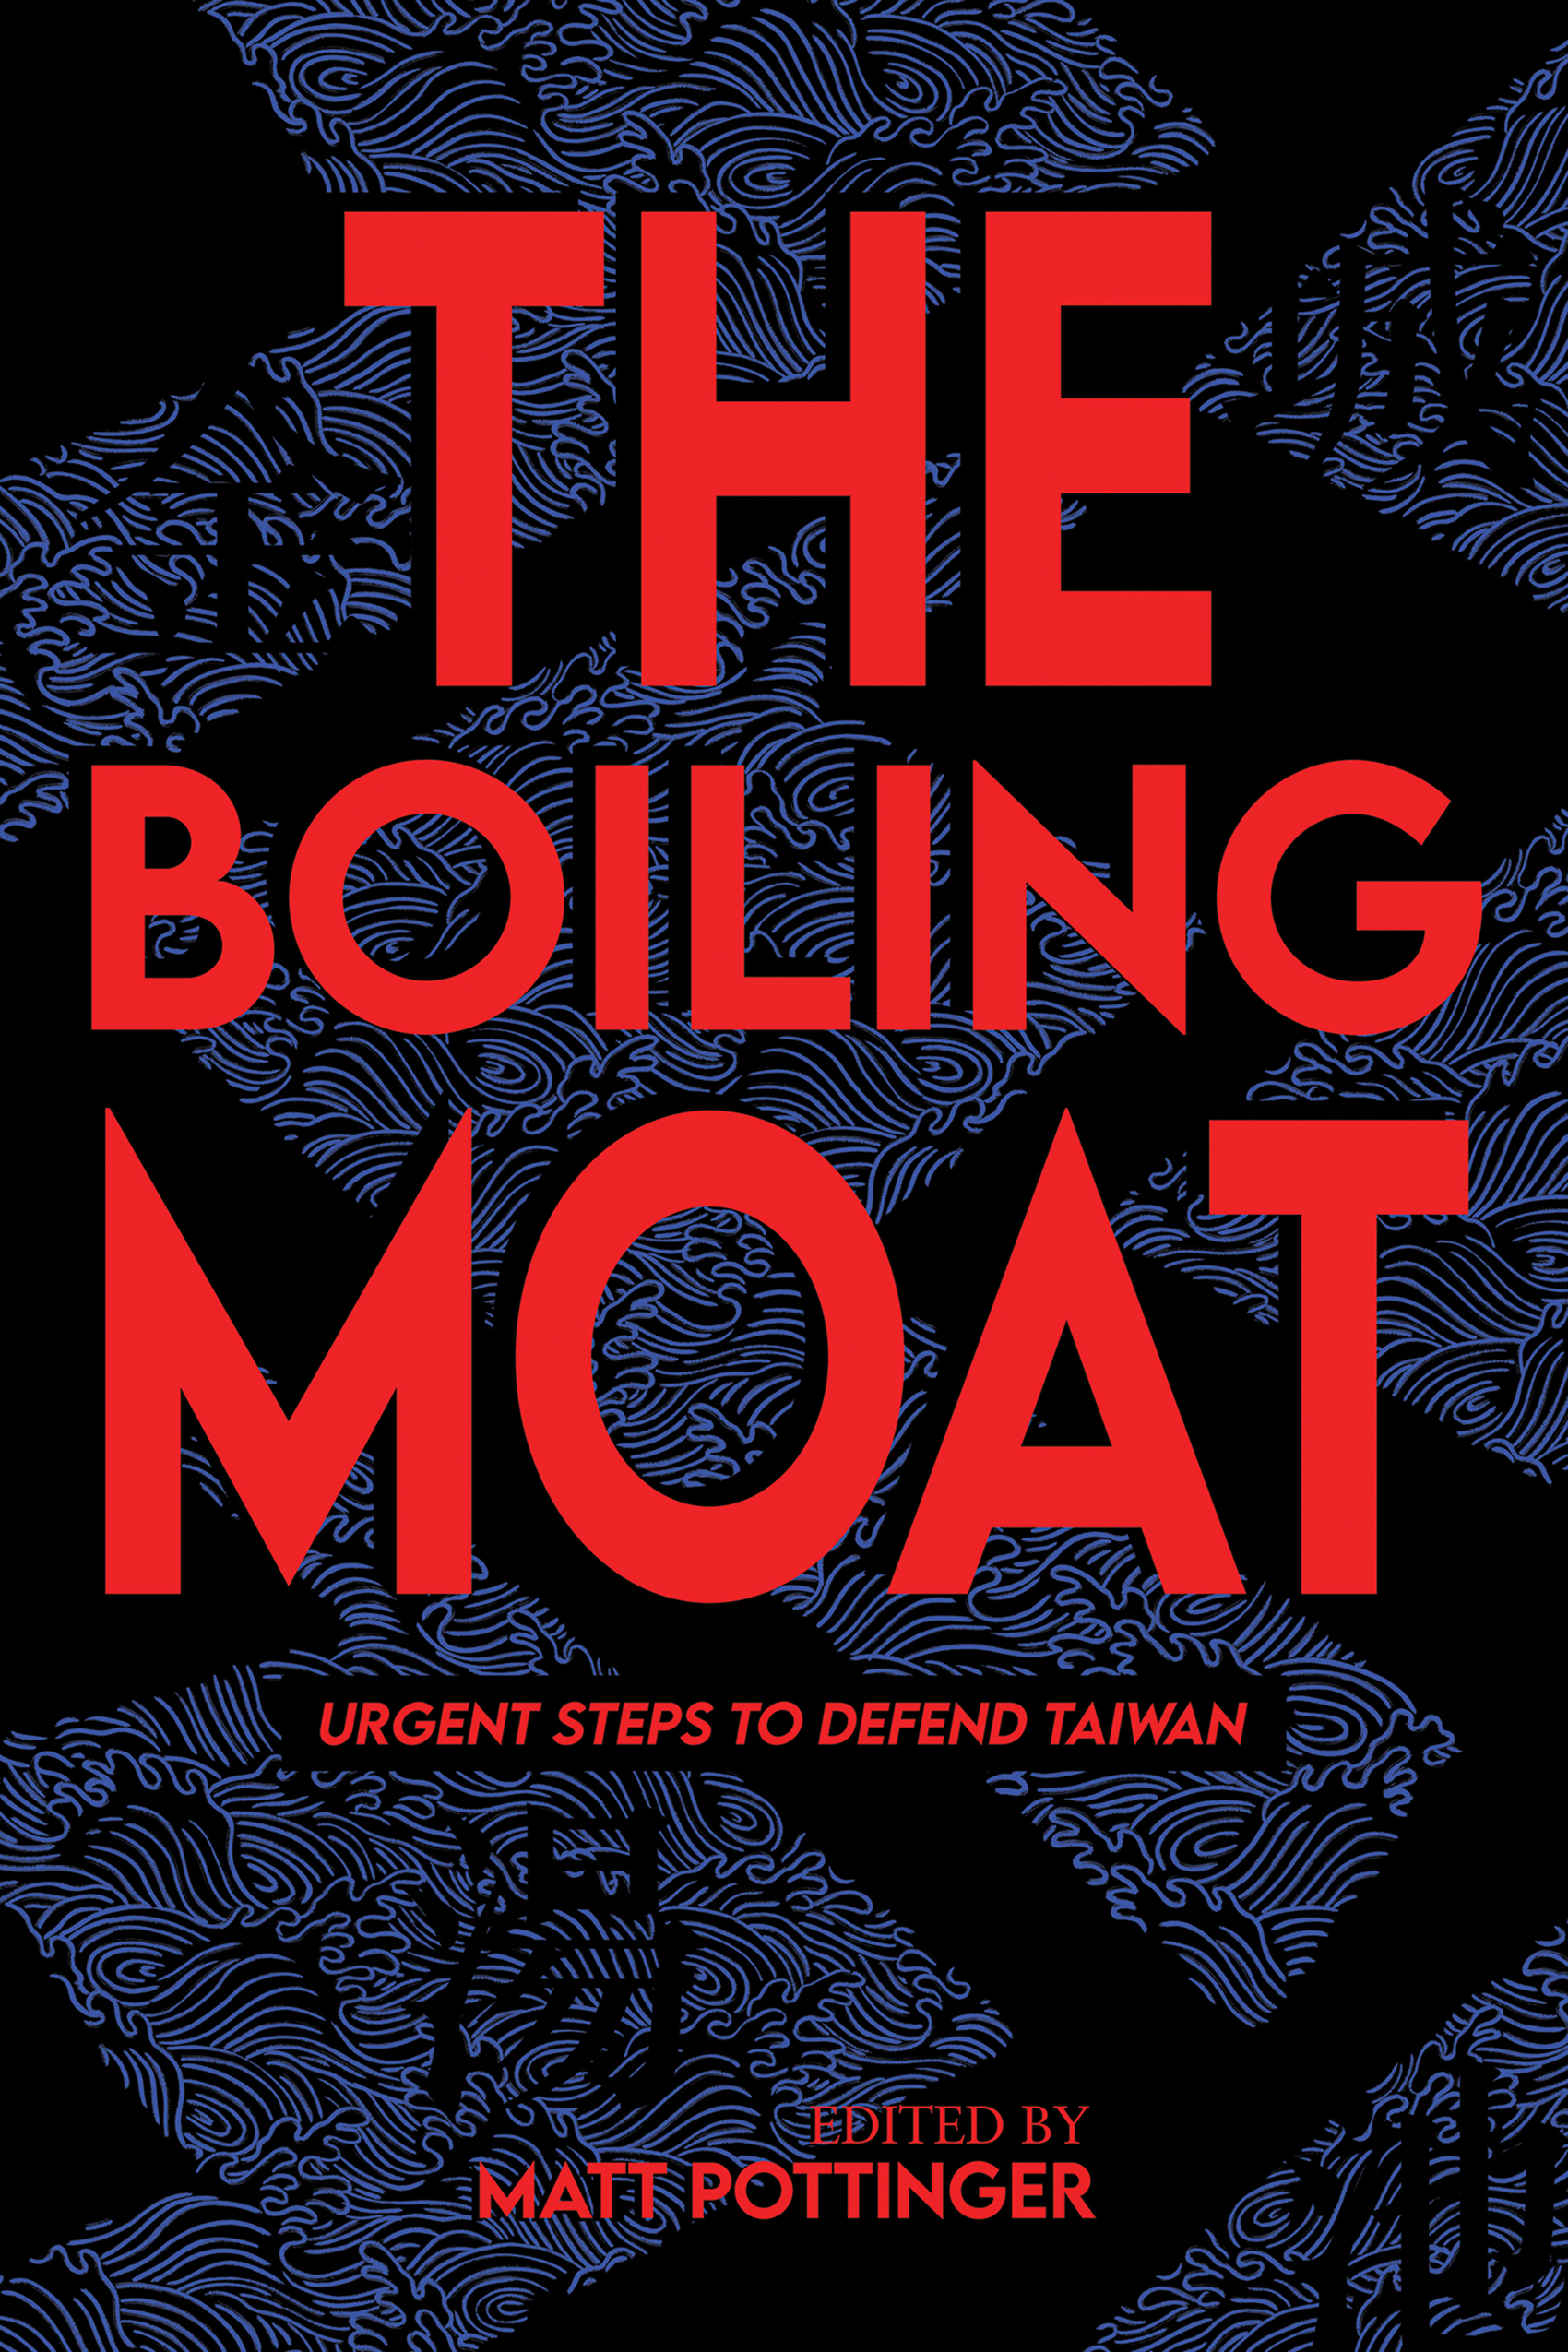 Boiling Moat Cover